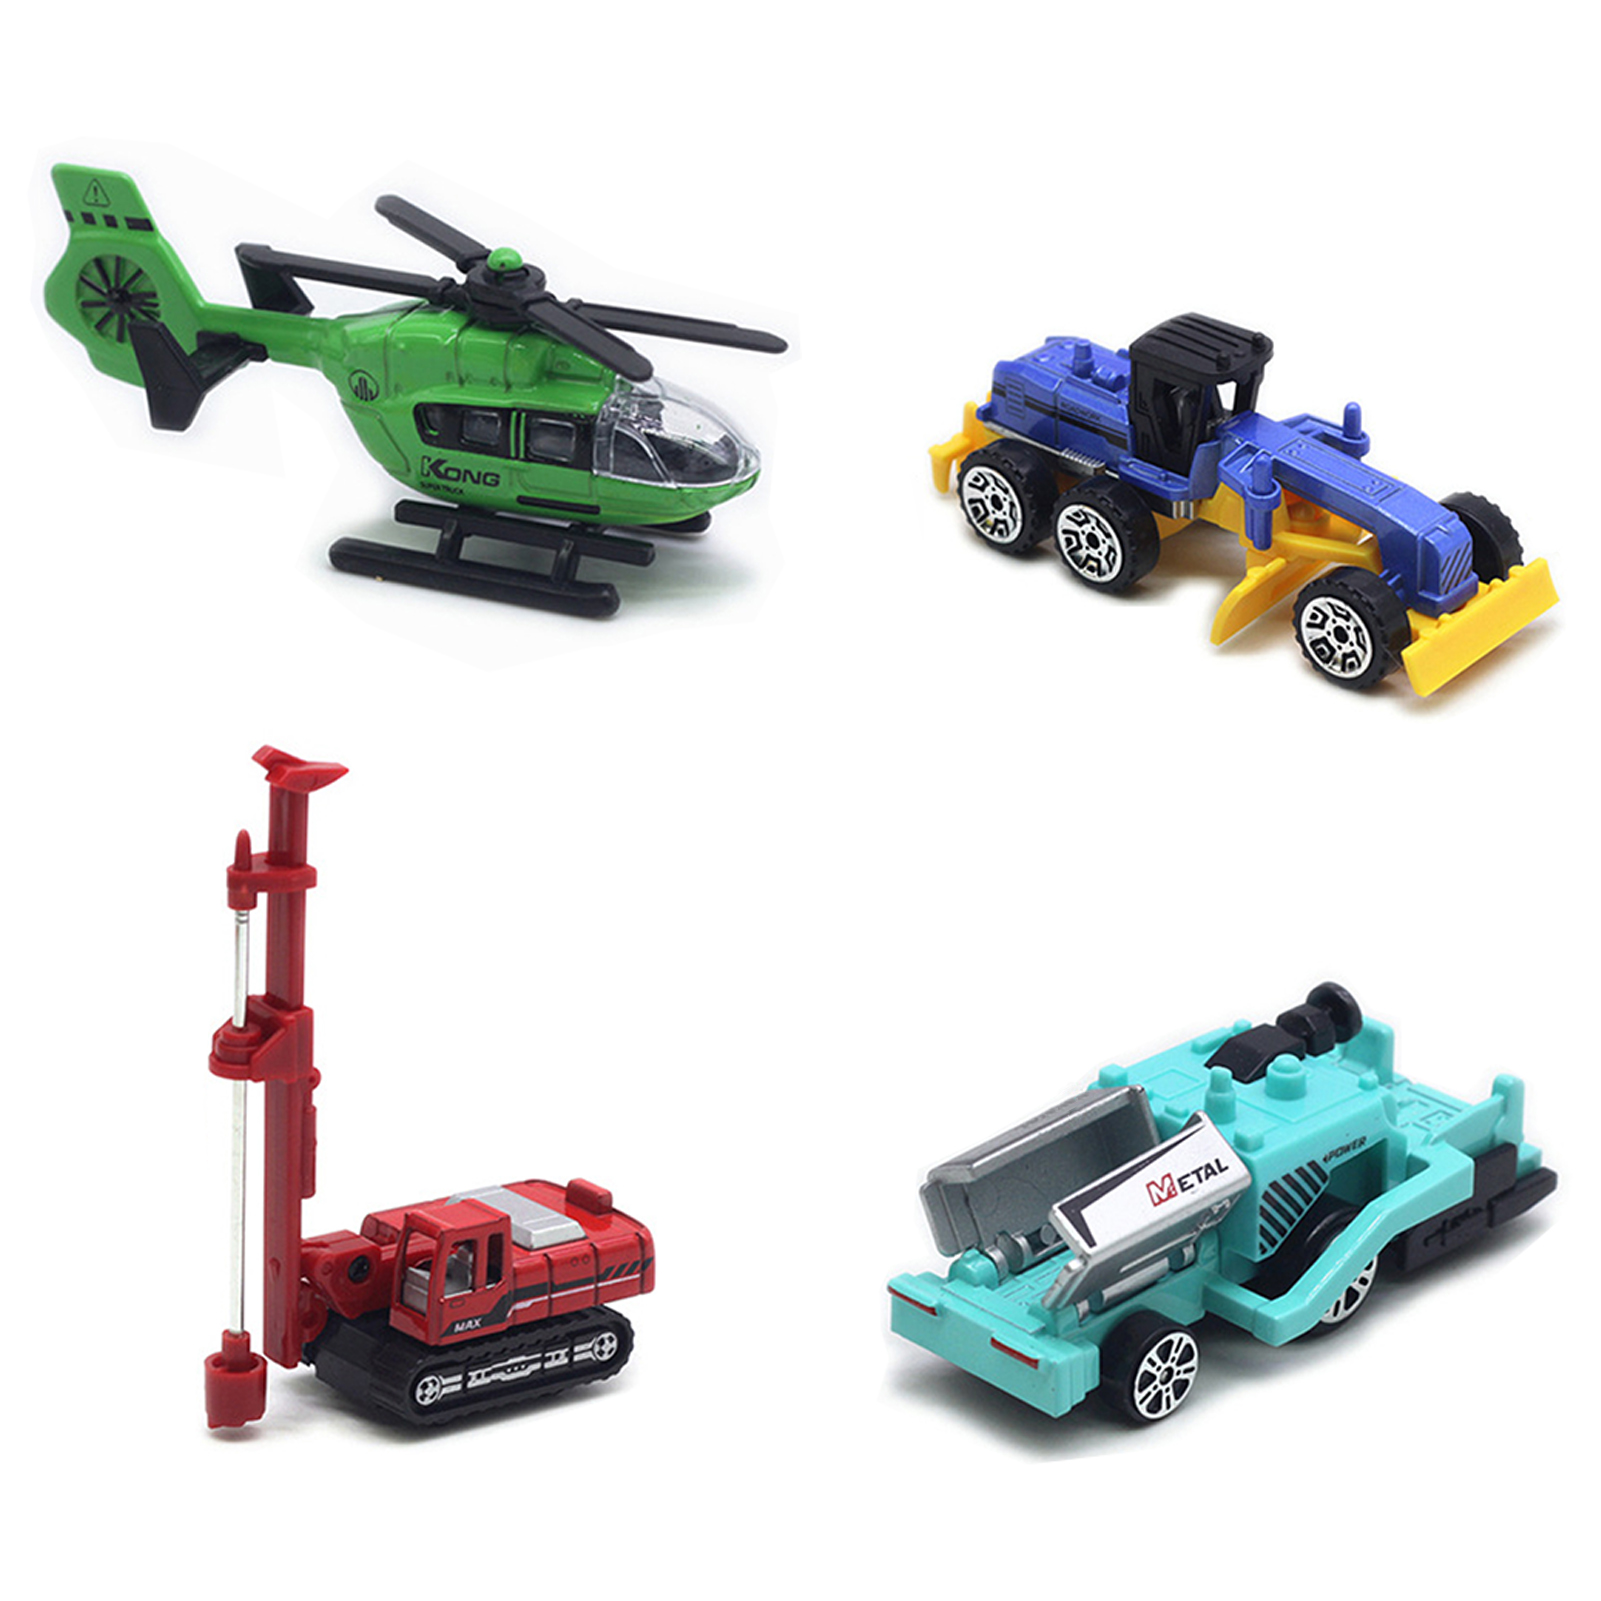 Pnellth 4Pcs/Set Engineering Trunk Toys Simulation Cranes Forklift Cargo Truck Diecast Alloy Vehicle Toy 1:64 Scale Engineering Vehicle Aircraft Motorcycle Models Set Christmas Gift - image 1 of 7